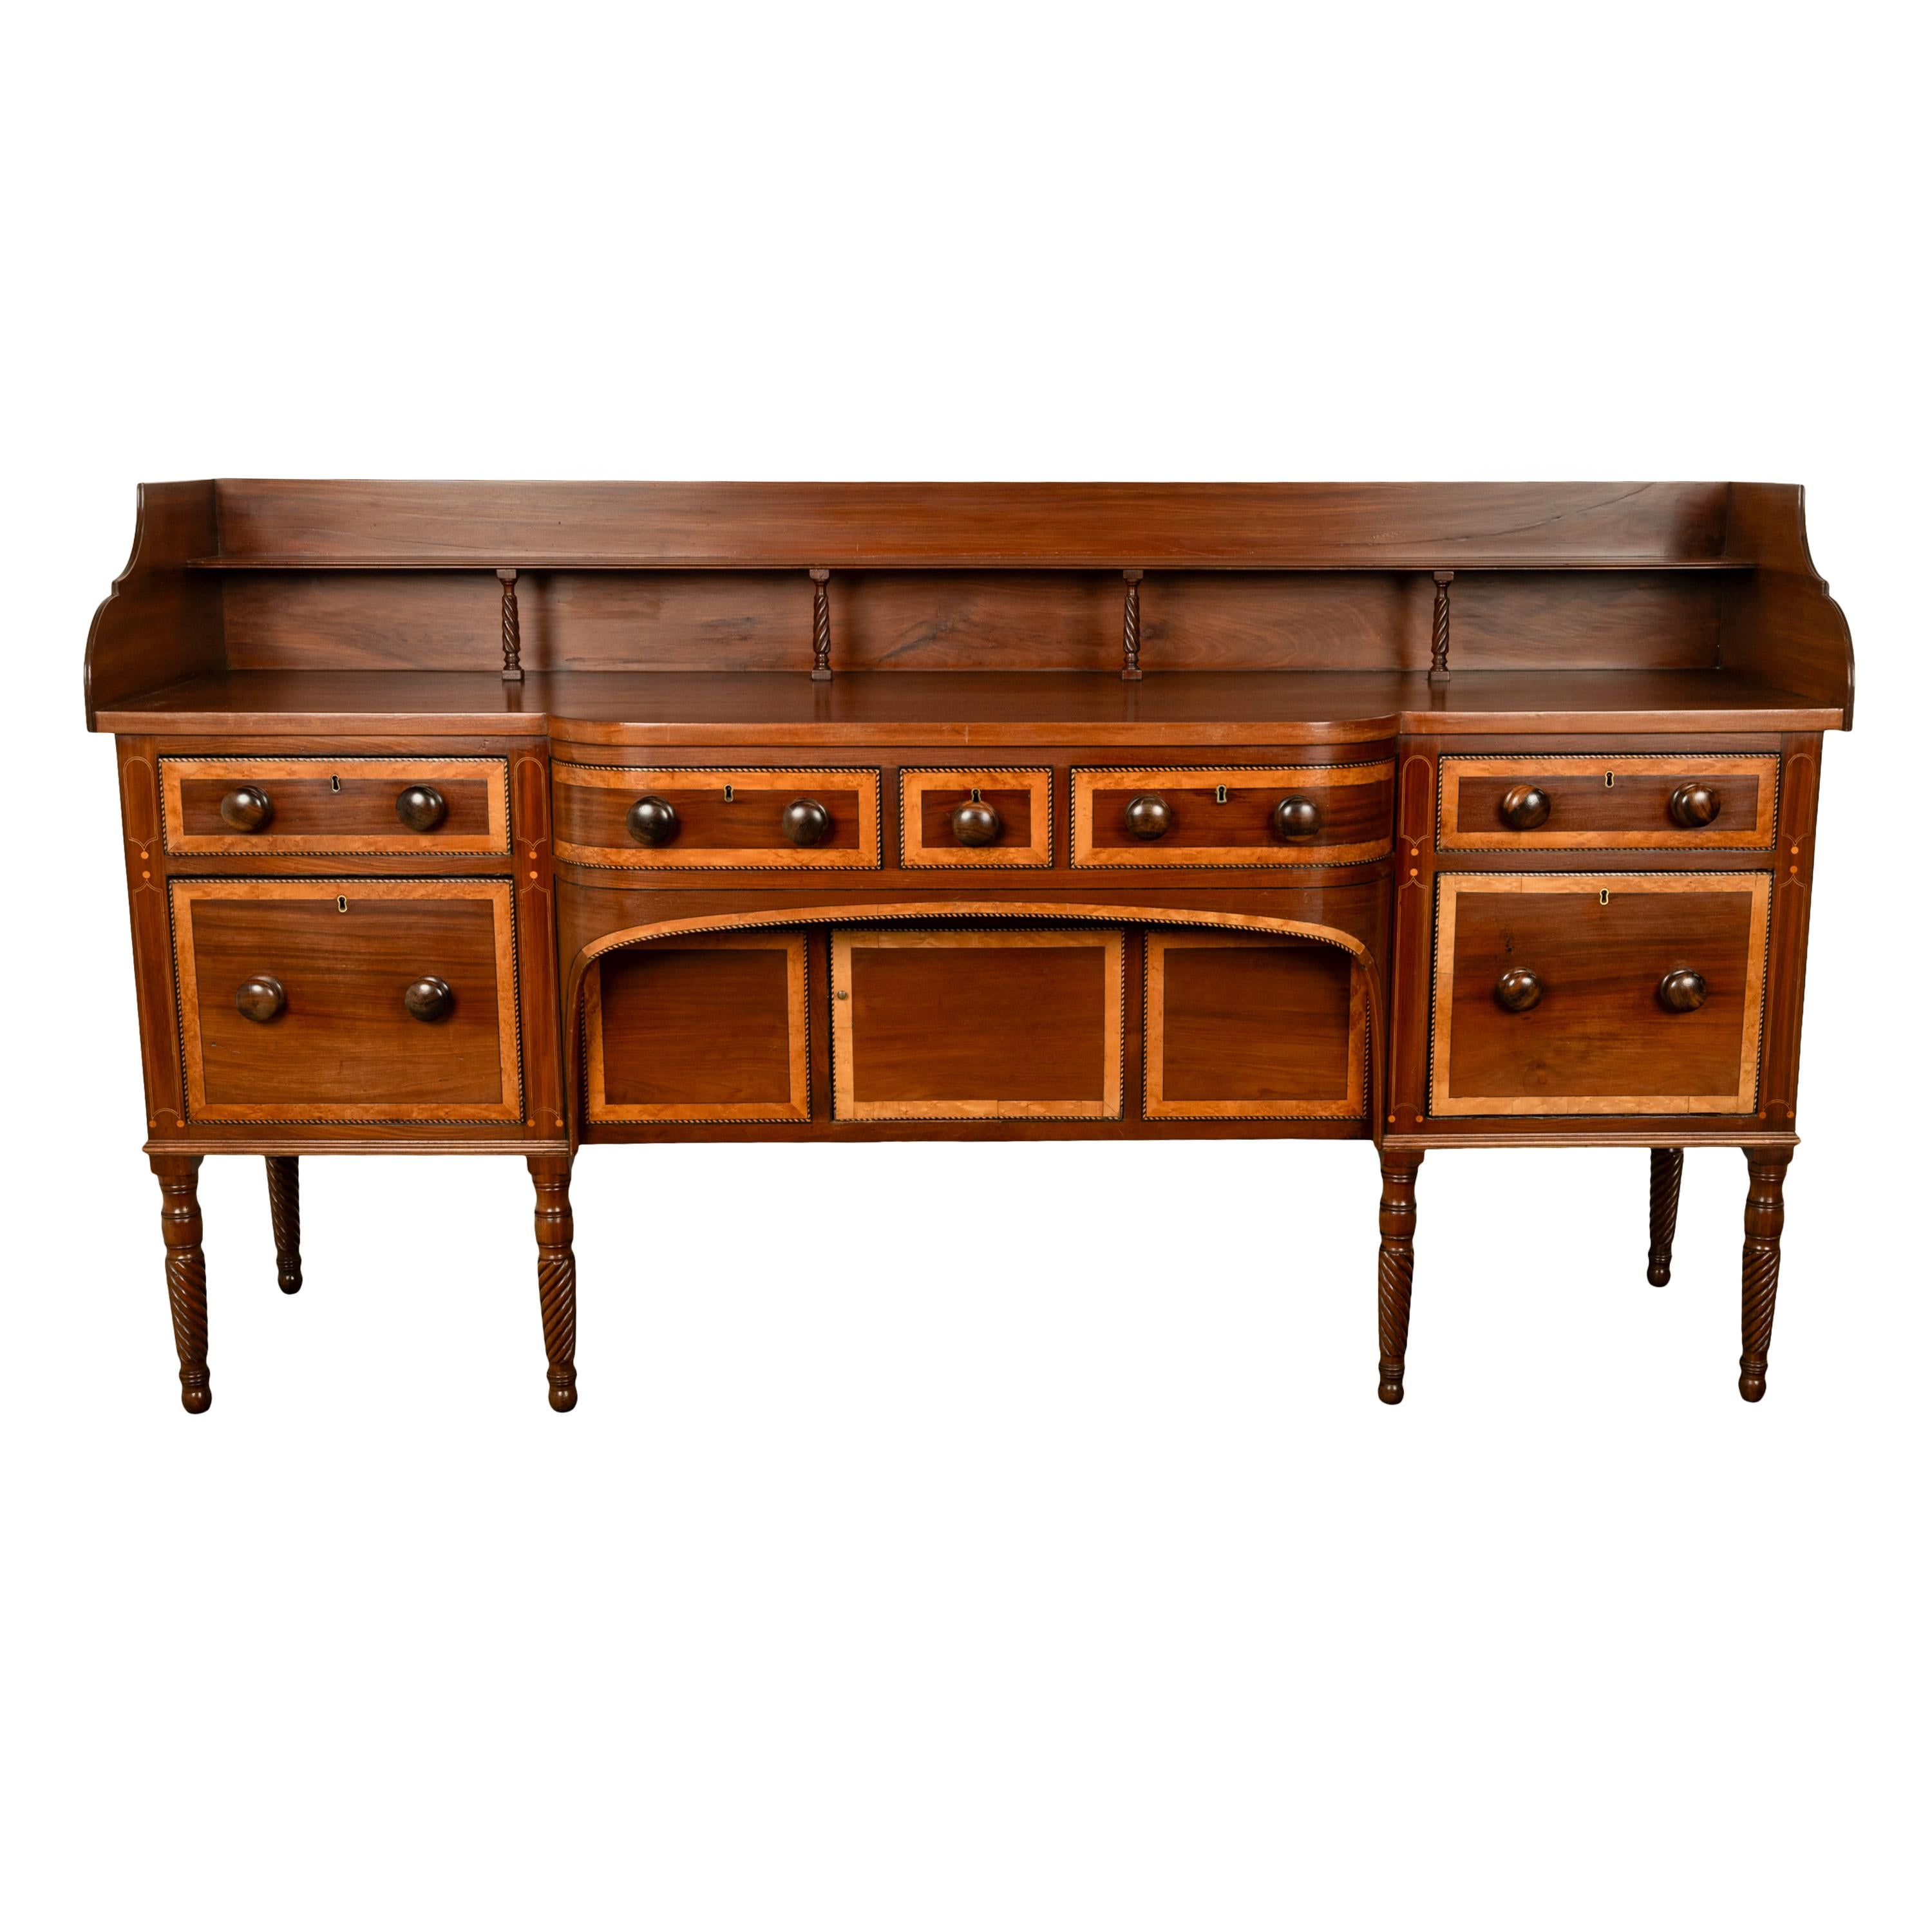 Carved Antique Georgian Irish Inlaid Cuban Mahogany Country House Sideboard Donegal For Sale